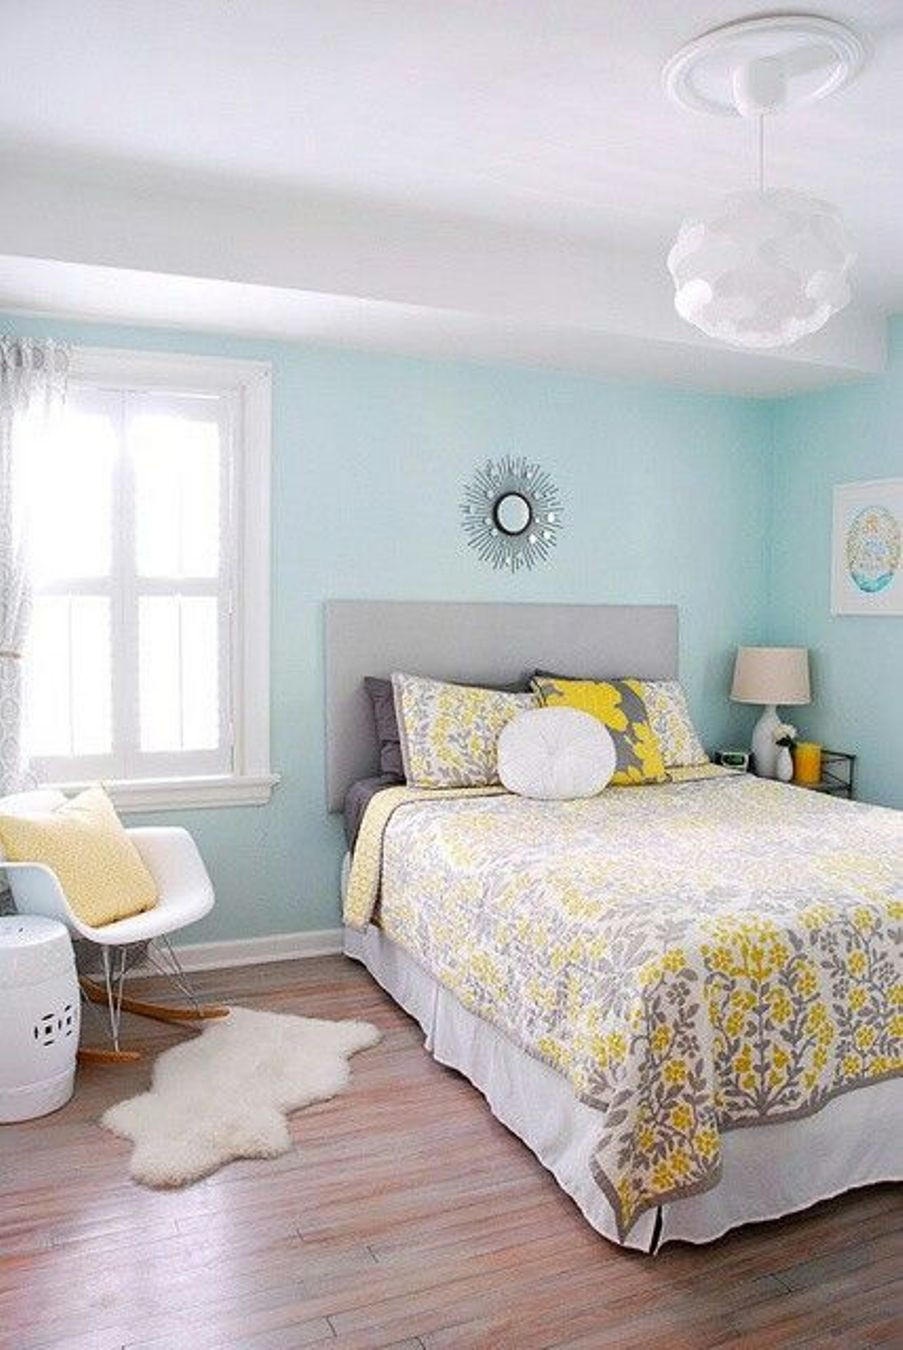 Paint Ideas For Small Bedroom
 Best Paint Colors for Small Room – Some Tips – HomesFeed